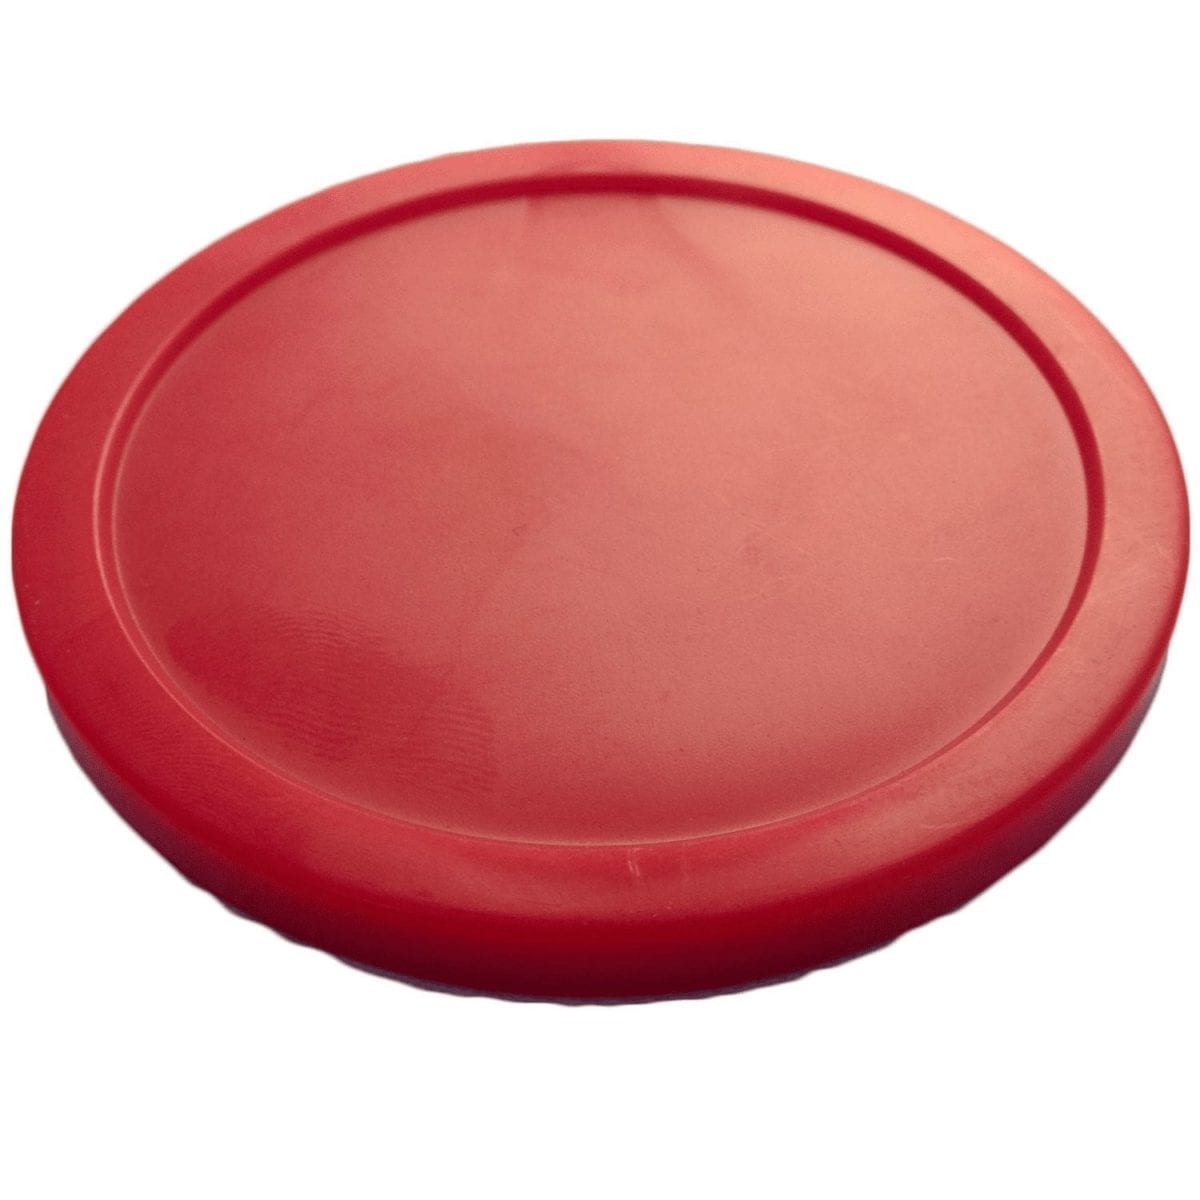 Shelti Gold Standard Games Red 3 1/4 Inch Air Hockey Puck 